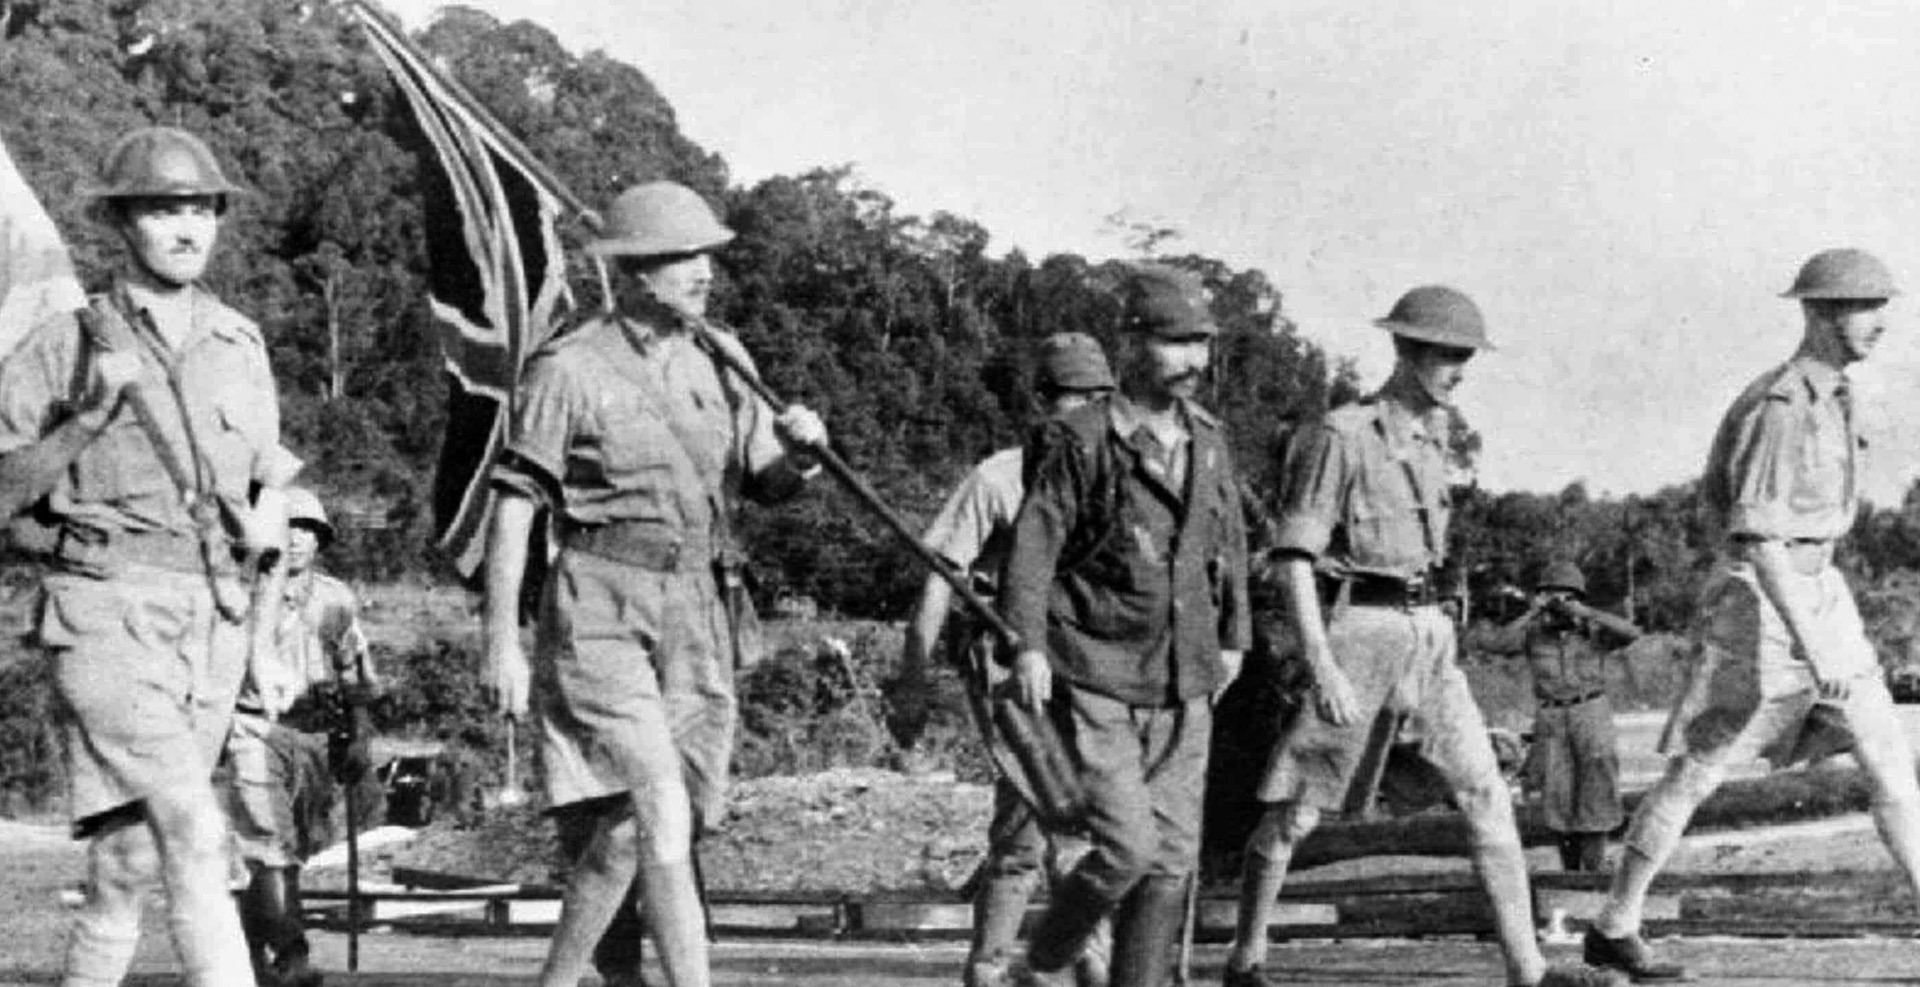 General Arthur Percival (far right) strides toward Japanese lines to discuss terms for the capitulation of the garrison of the great British colonial bastion of Singapore on February 15, 1942. Somber British soldiers carry the Union Jack and a flag of truce as they walk beside an escorting Japanese soldier.